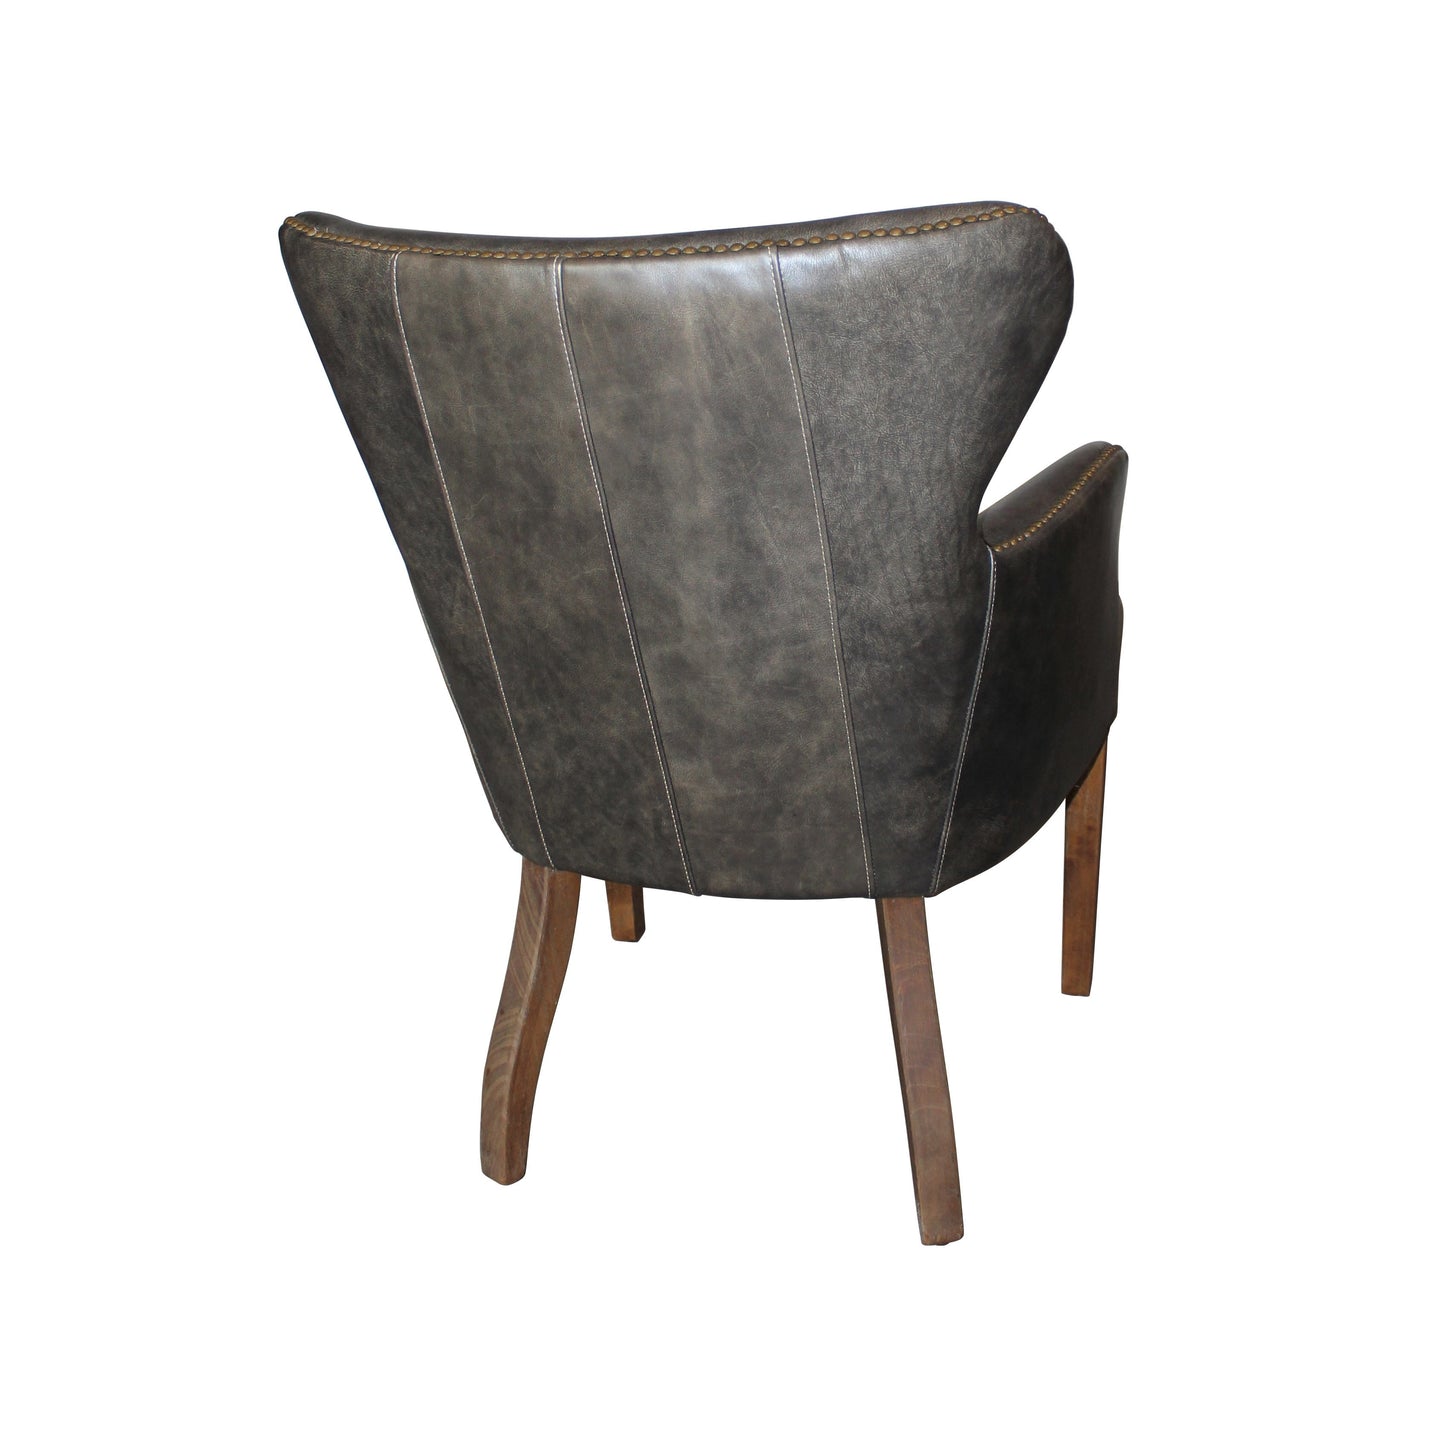 Relihan Chair, leather CLOSE-OUT